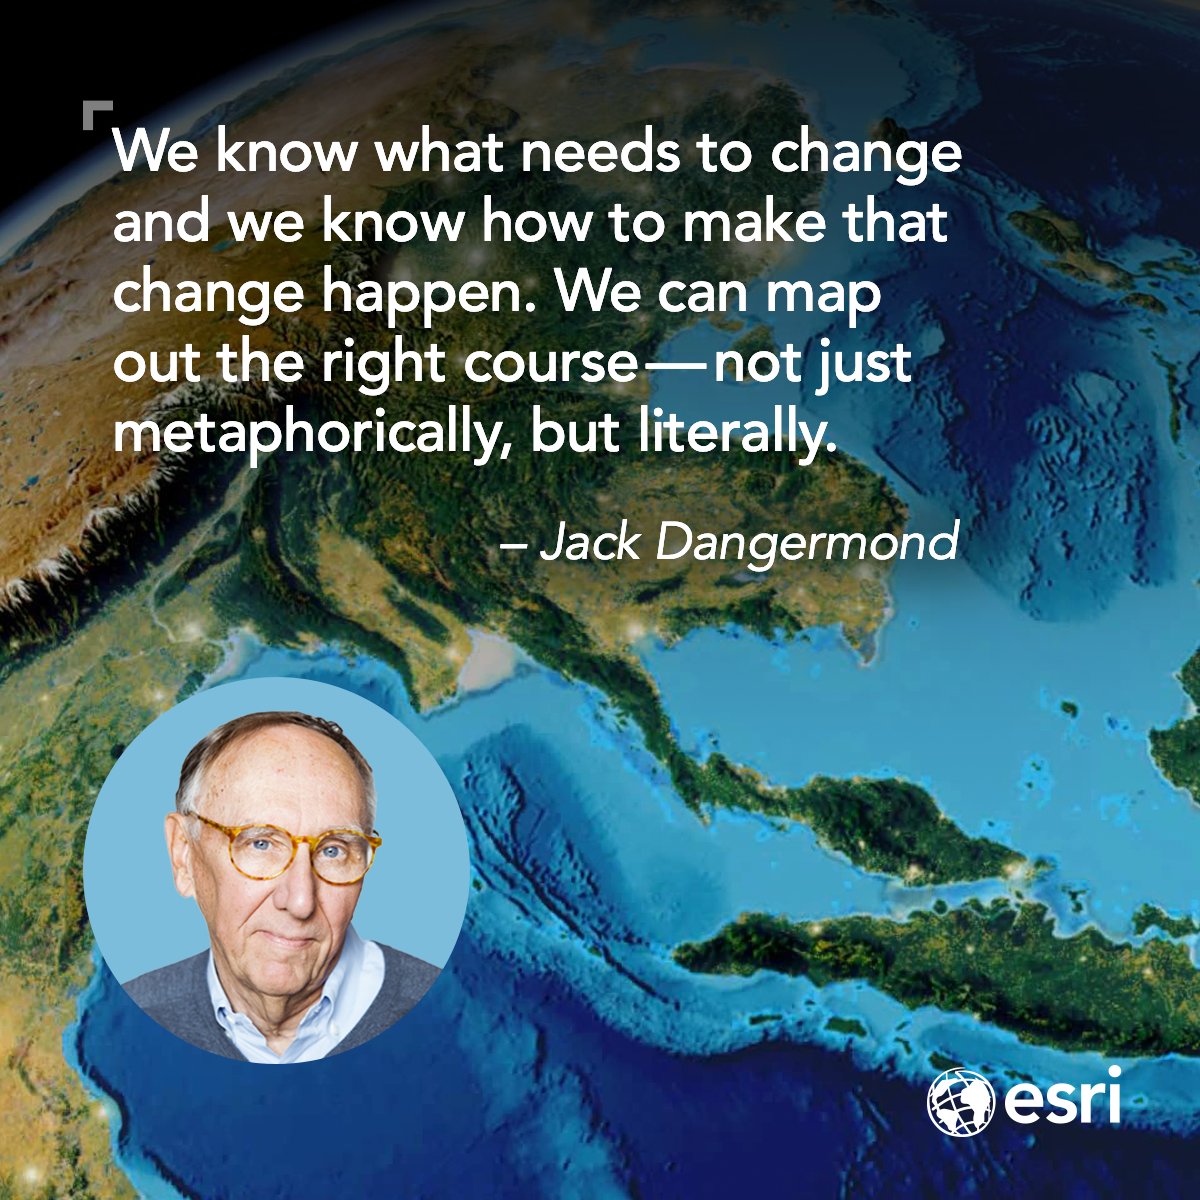 Since the first Earth Day in 1970, progress has been dramatic. But there's more to be done. Fortunately, we now have the tools to help us map a better future. Jack Dangermond shares his thoughts on creating the world we want to live in. esri.social/TE1U50RjtiN #EarthDay🌏 #GeoAI